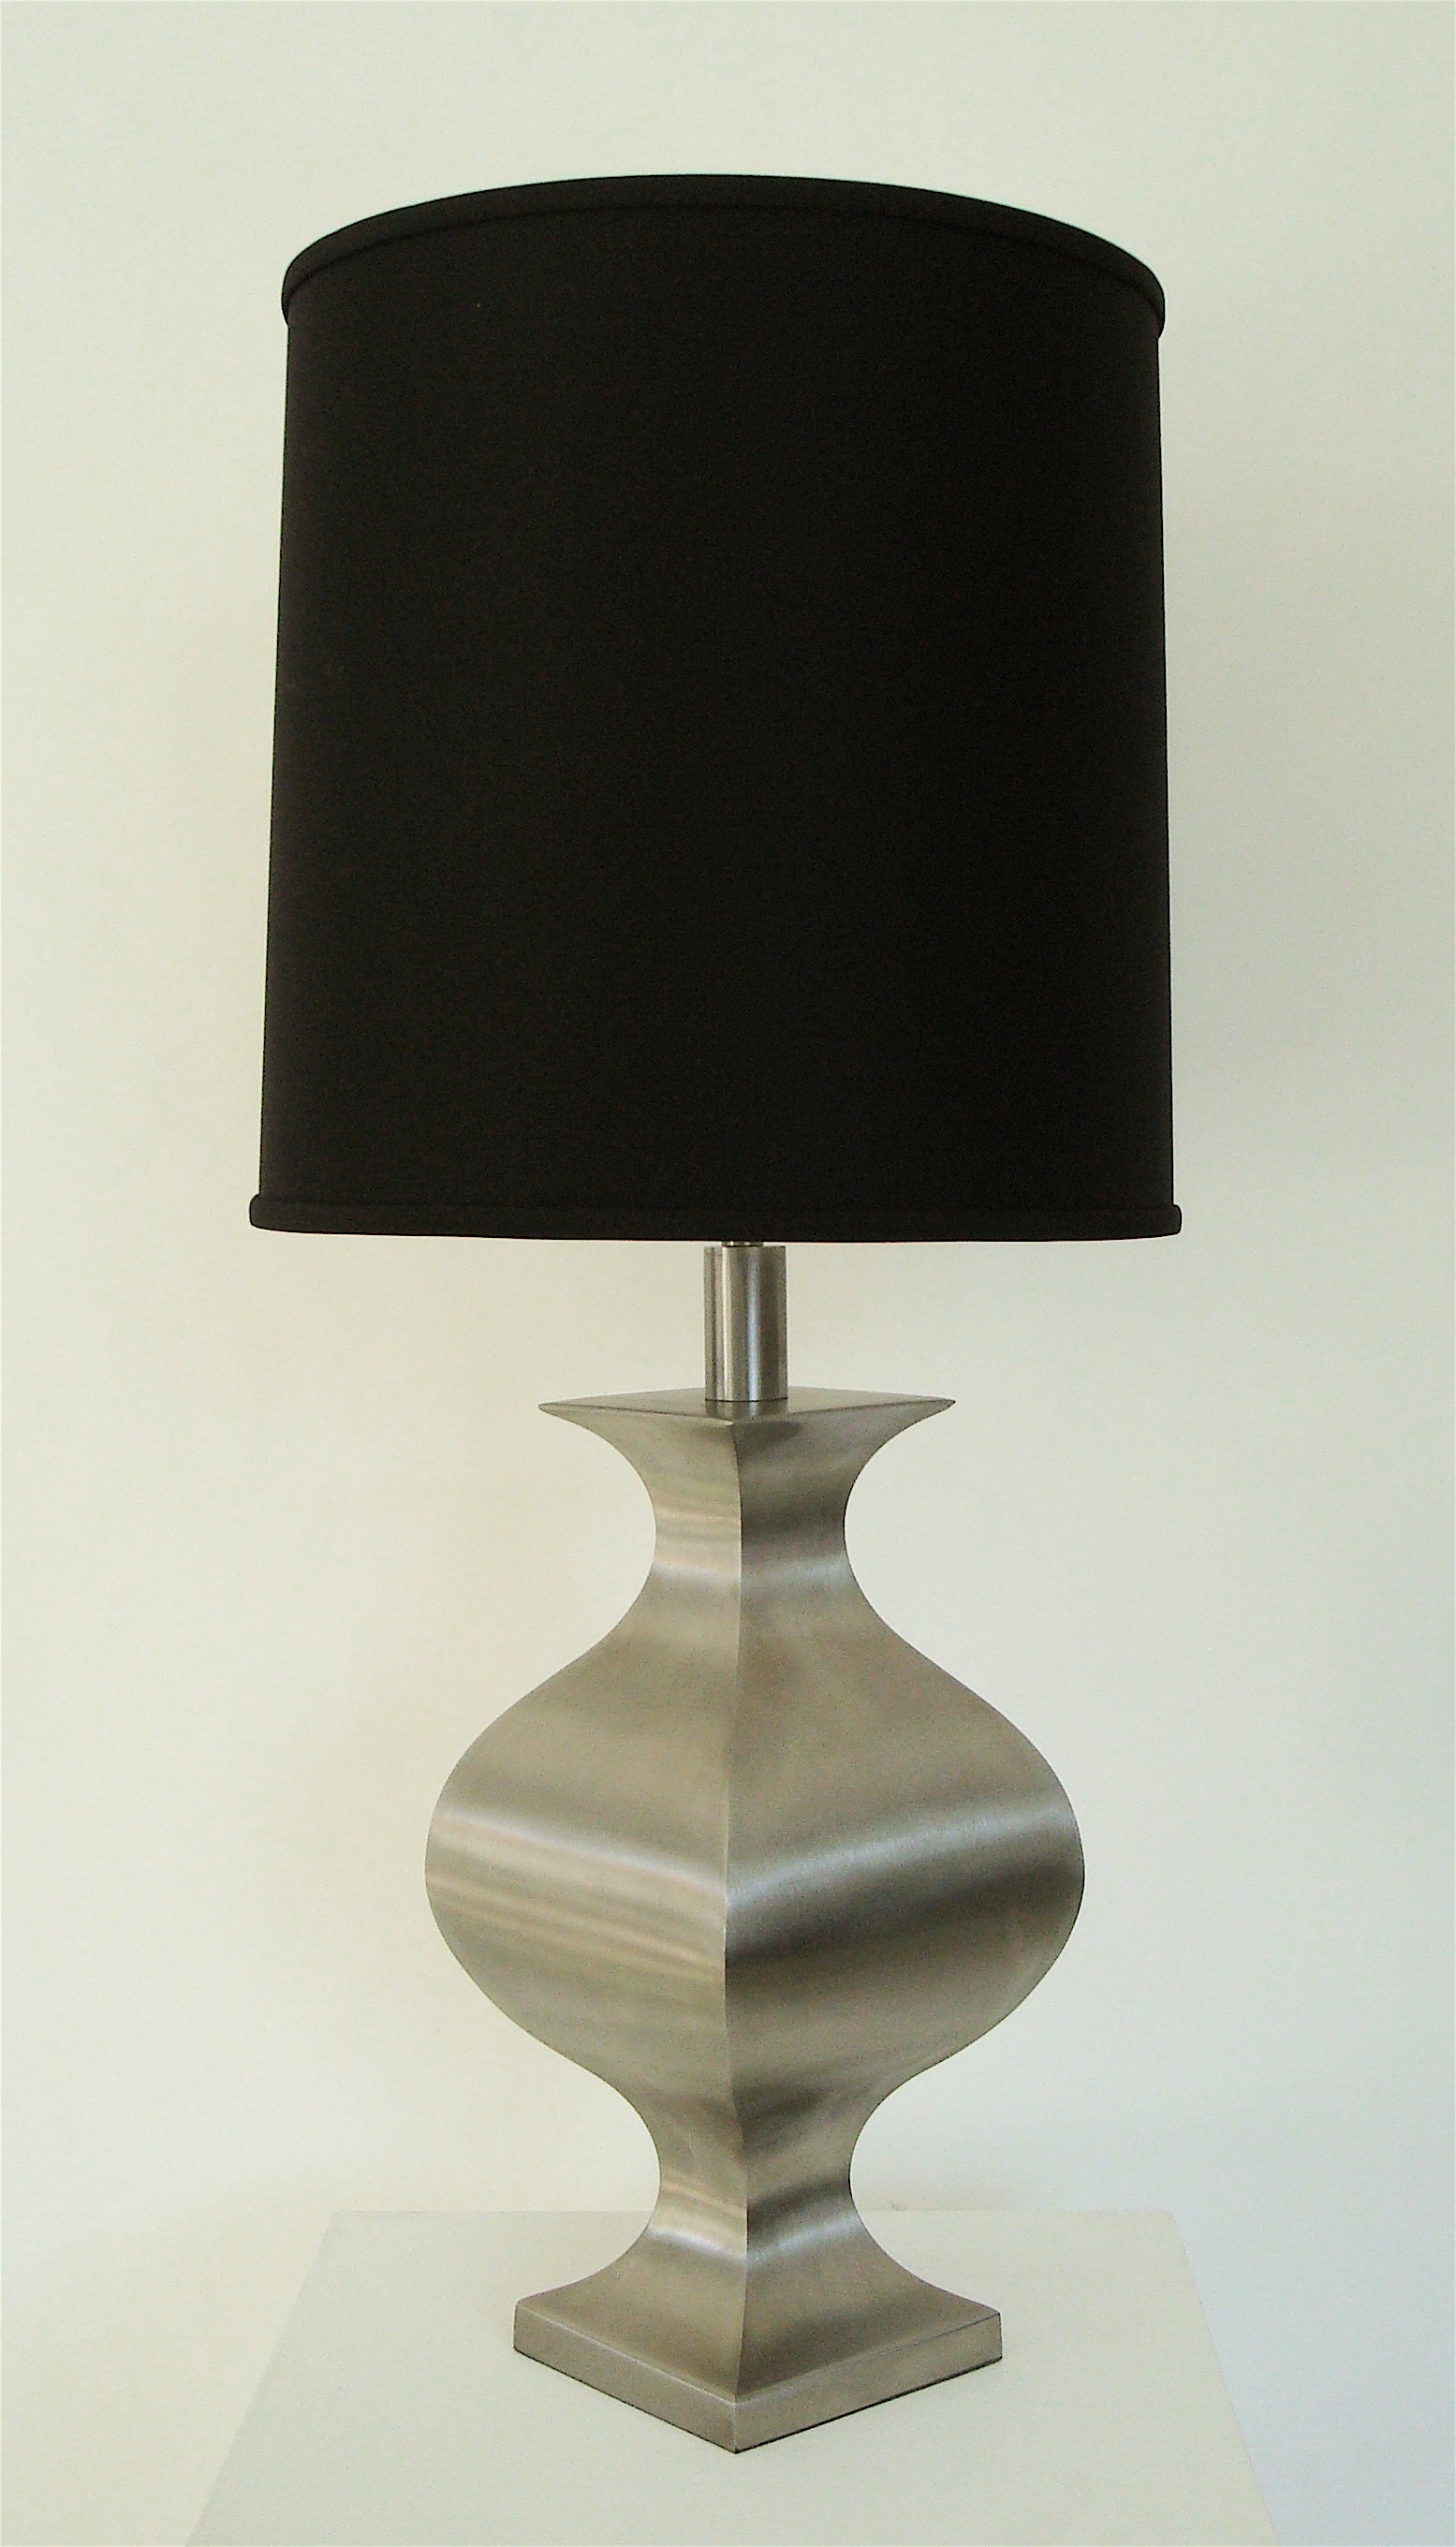 French Brushed Stainless Steel Table Lamp by Francois See for Maison Jansen For Sale